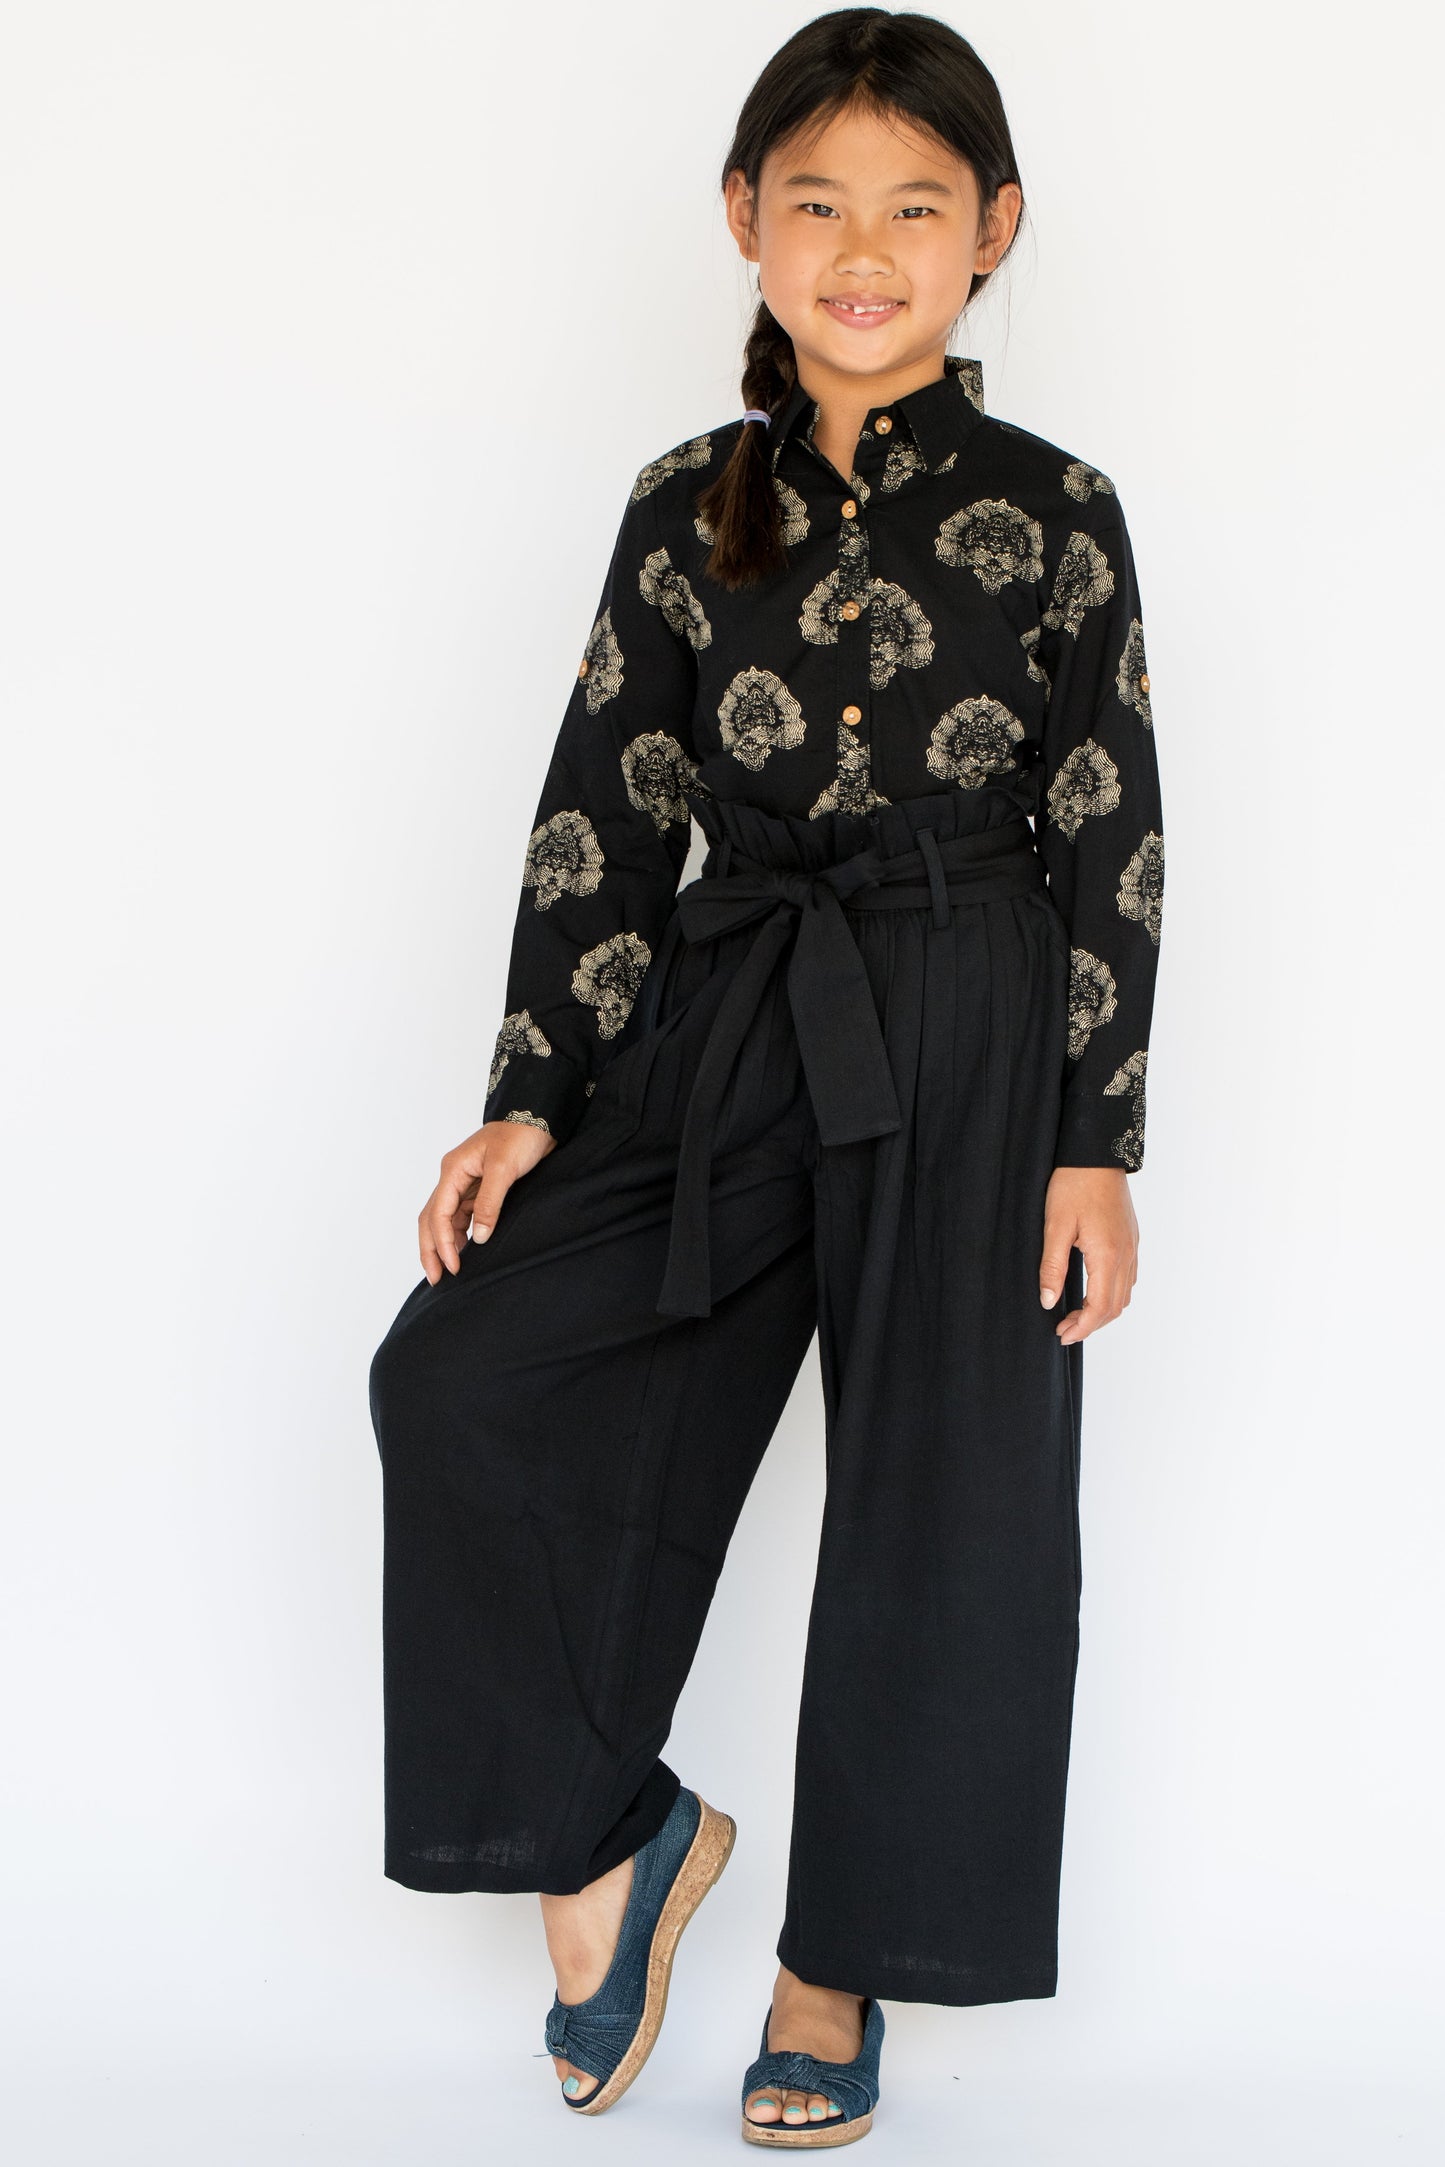 Abstract black Button Down Shirt with Black Paper Bag Pants 2 pc. Set